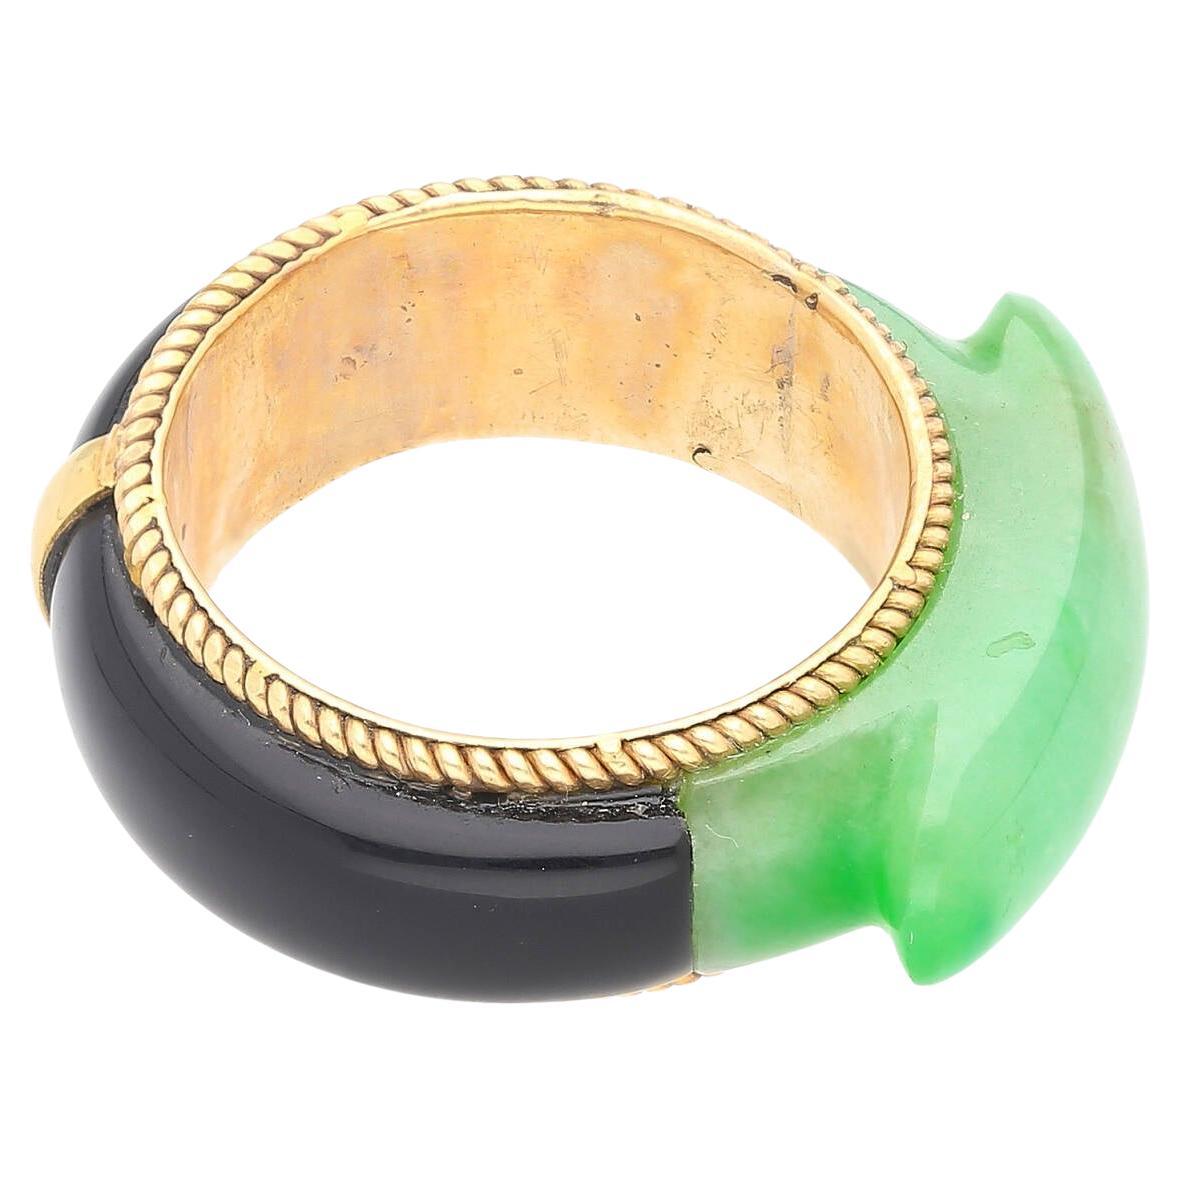 14K Yellow Gold Ring weighing 5.97 grams. The ring boasts a remarkable 11.40-carat carved Jade, exhibiting an enchanting green hue that exudes natural beauty. Complementing the Jade, the ring features an Onyx band that adds contrast and